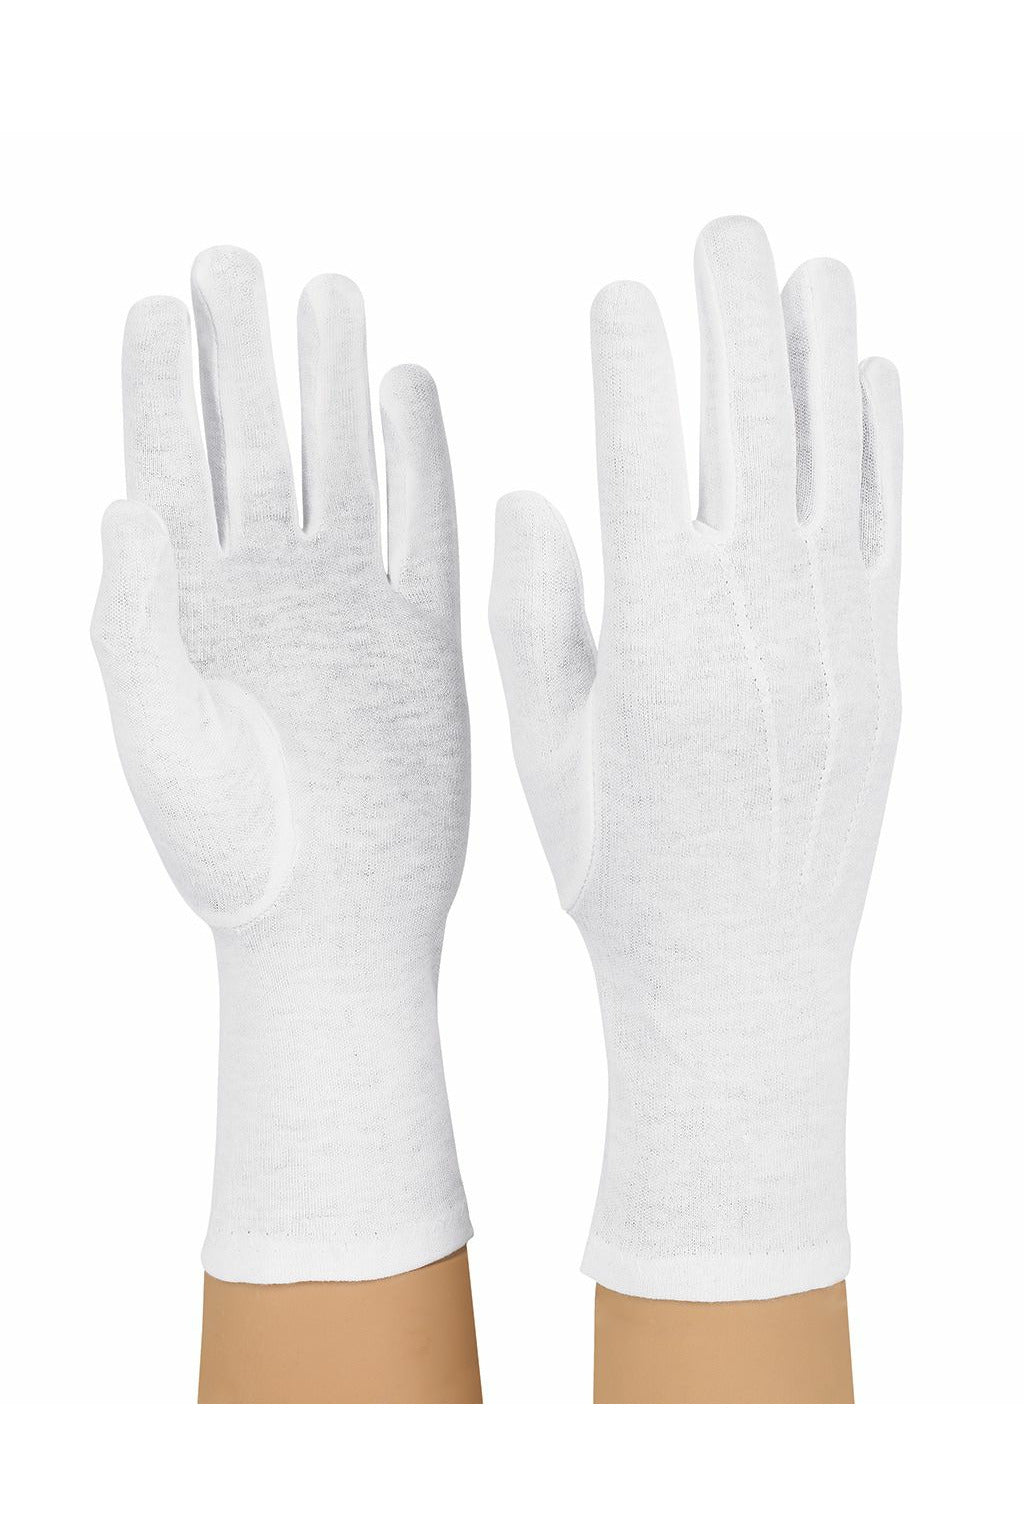 Long Wristed Cotton Military Gloves Styleplusband